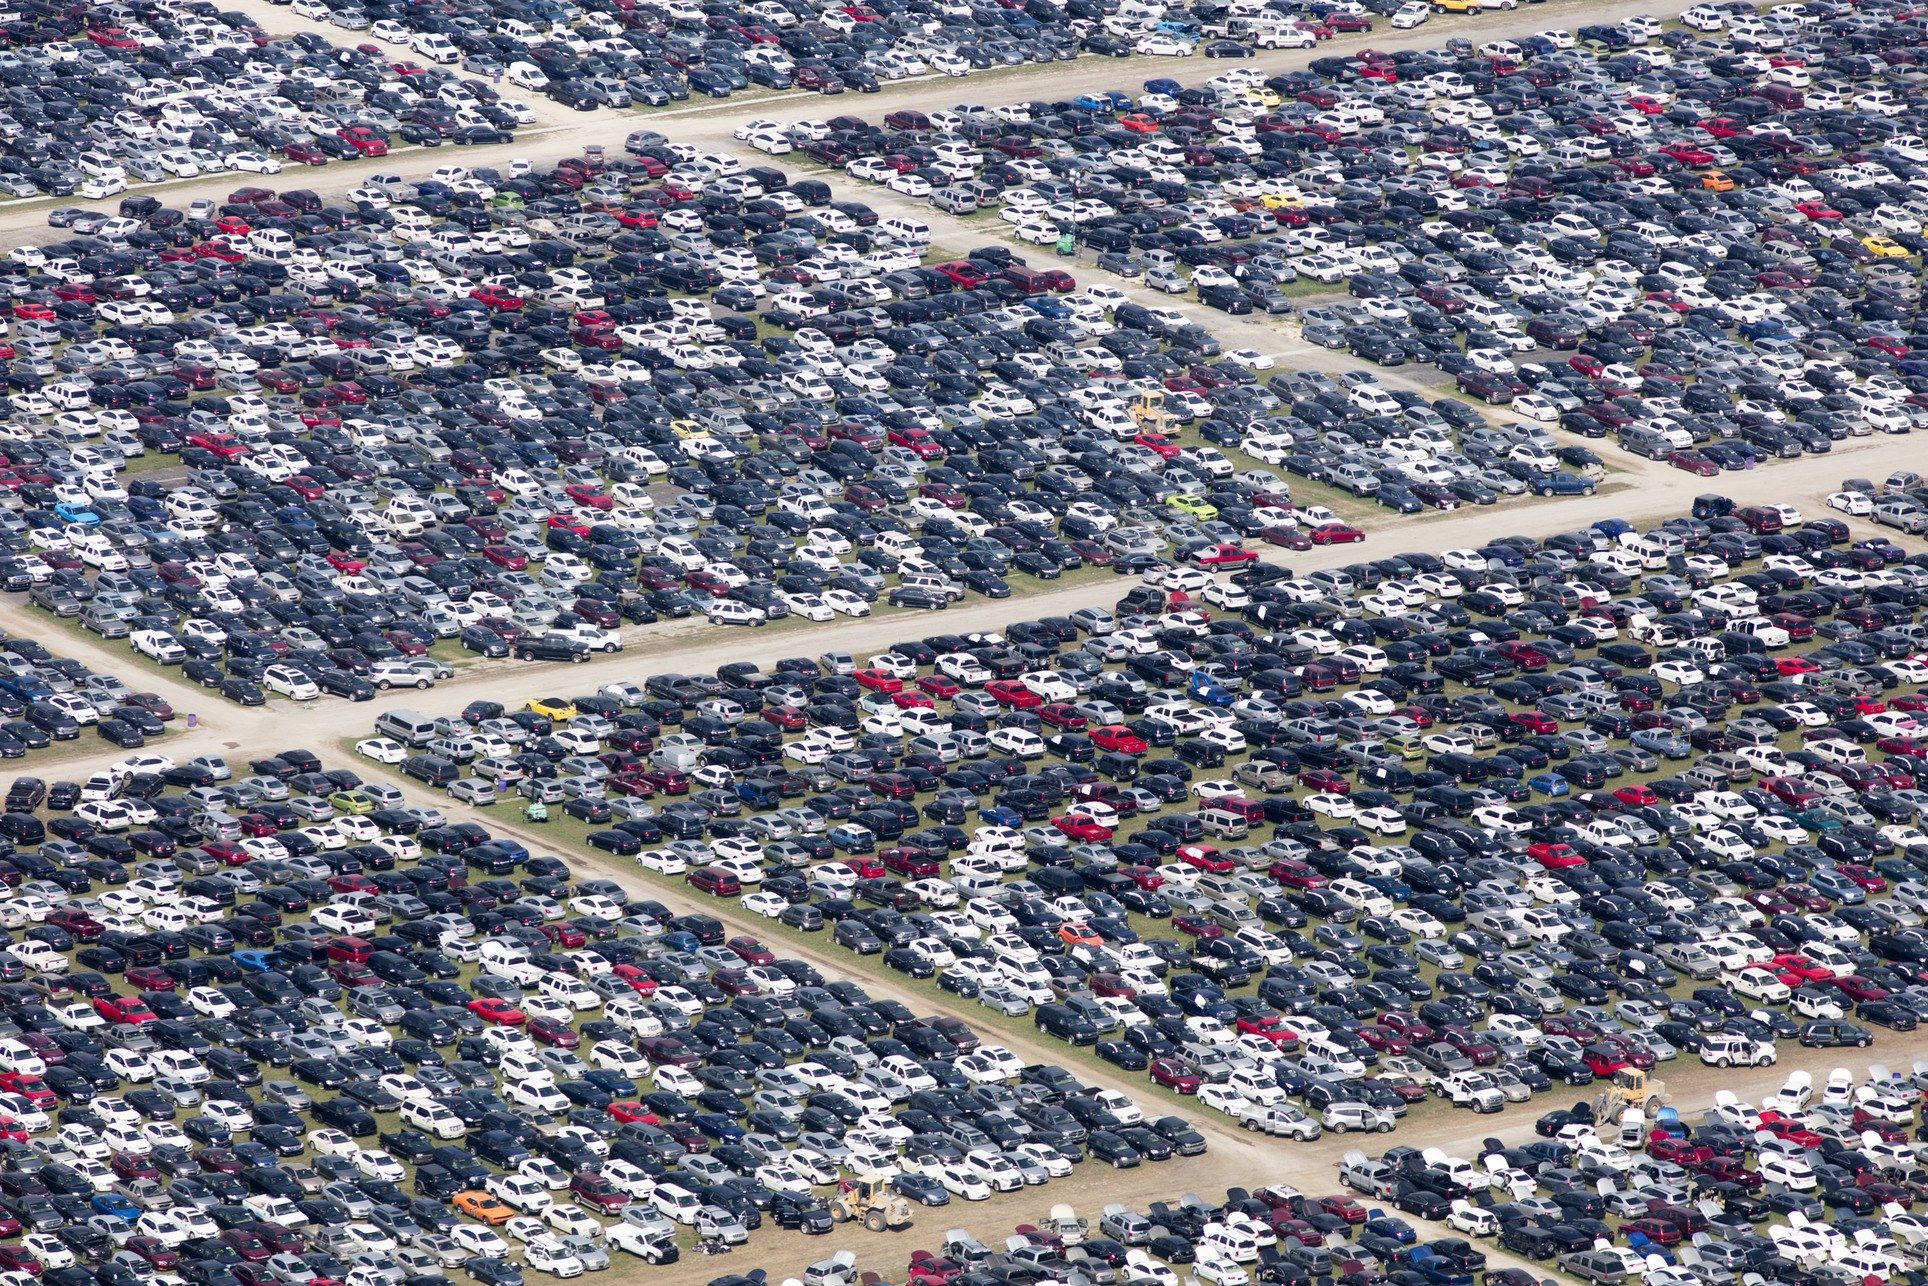 Administrators of the Royal Purple Raceway, in Baytown, Texas, have cancelled its fall schedule and turned the four-hundred-acre property into a temporary lot for about twenty-eight thousand storm-damaged vehicles that await salvage or disposal. Image by Alex MacLean. United States, 2017. 